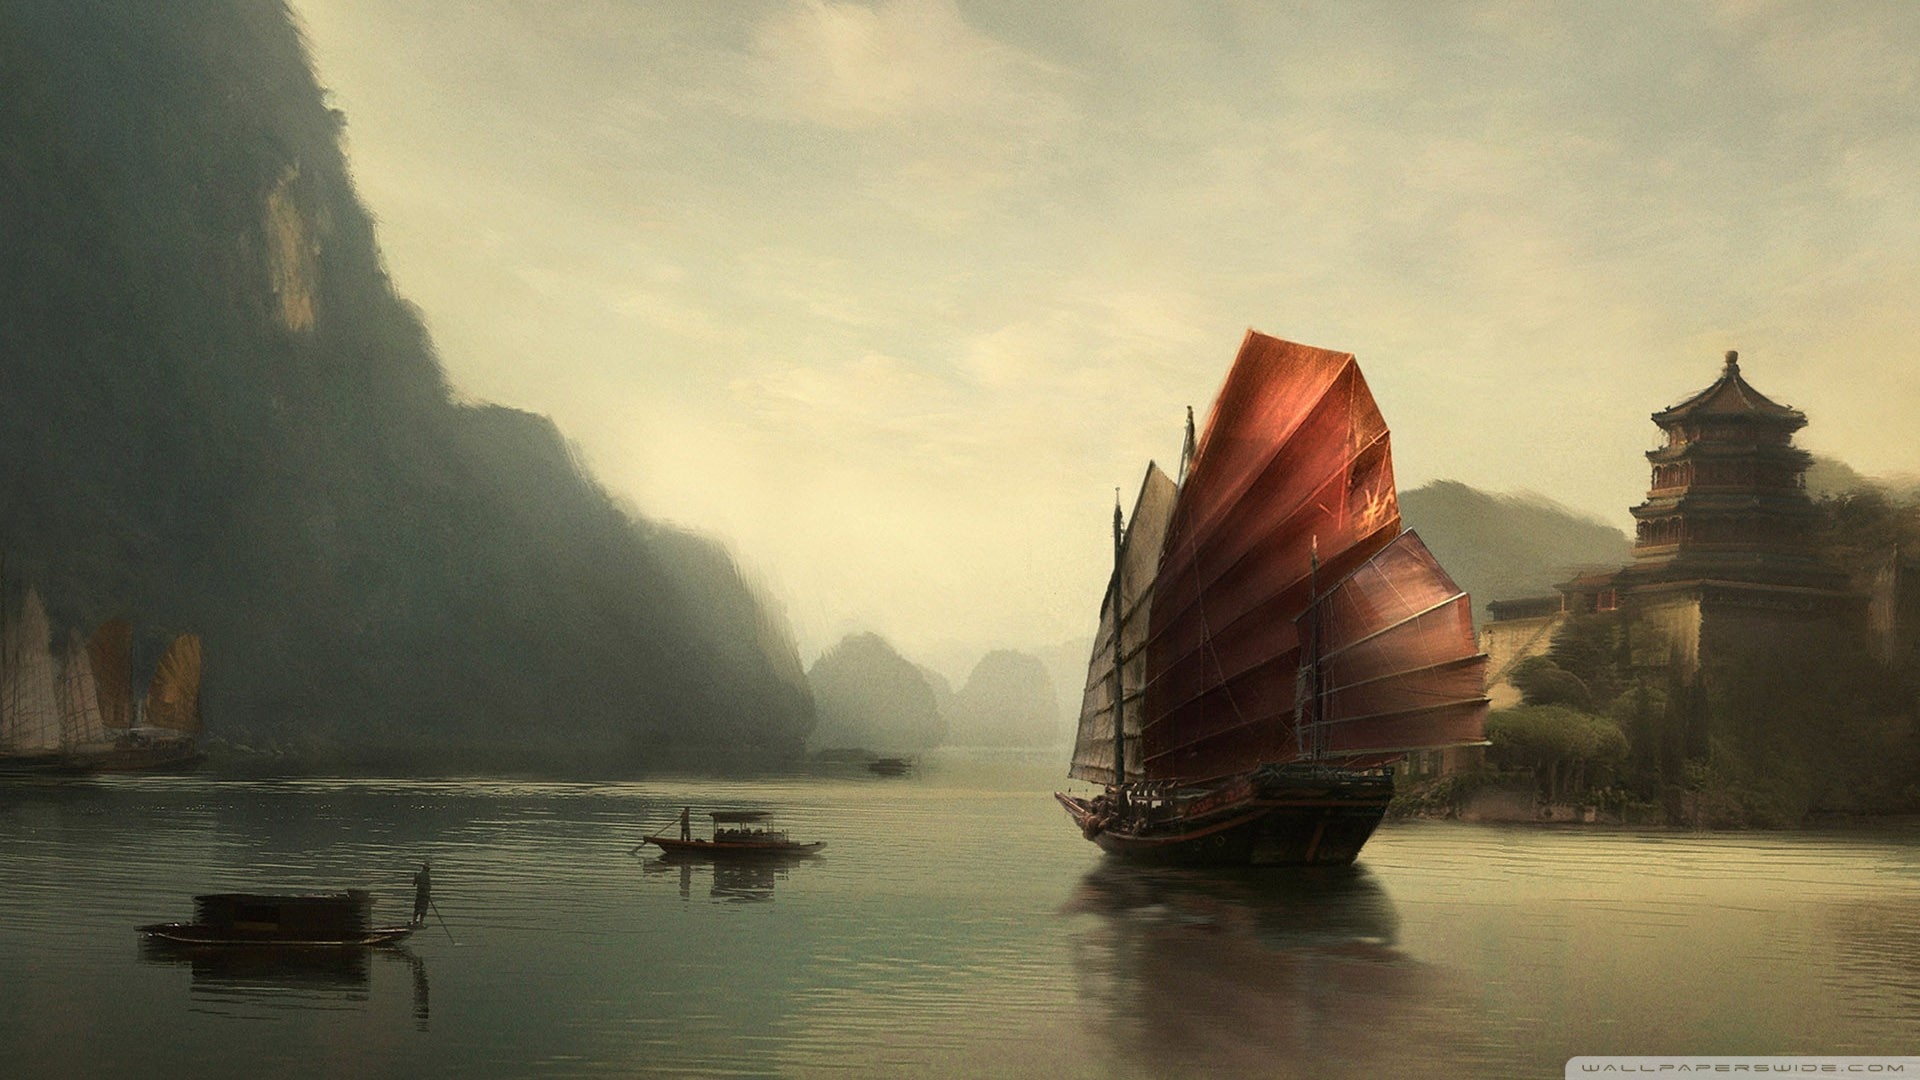 Painting of a junk in China.